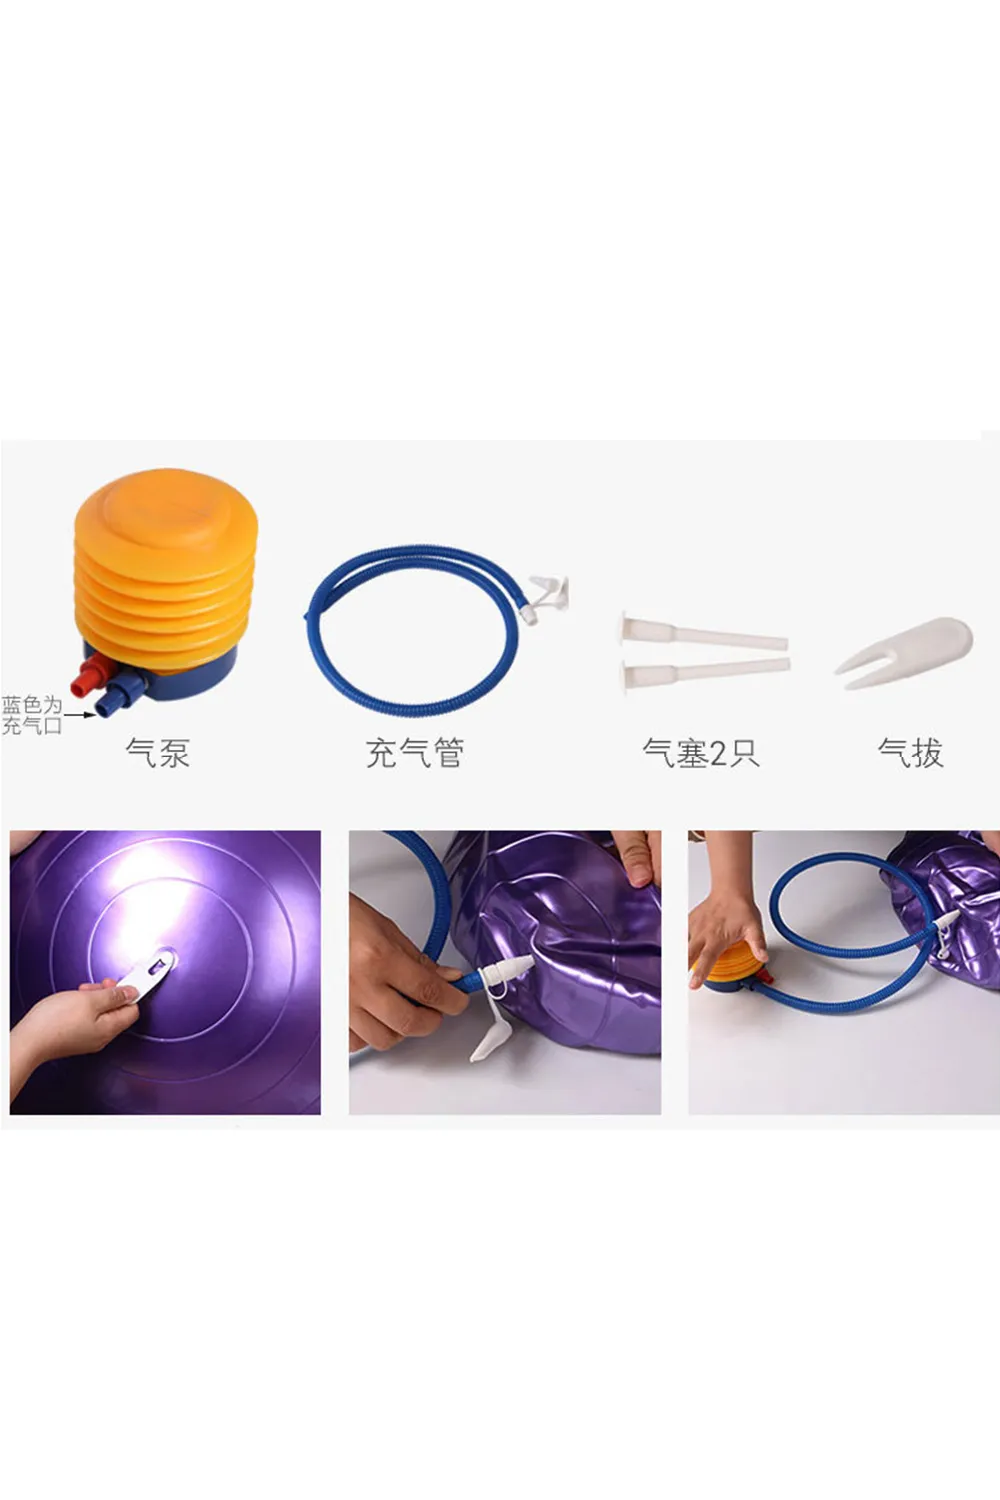 65cm US Stock Yoga Tune Balls With Pump For Fitness, Pilates, Gym, And  Massage FY8051 From Cinderelladress, $18.48